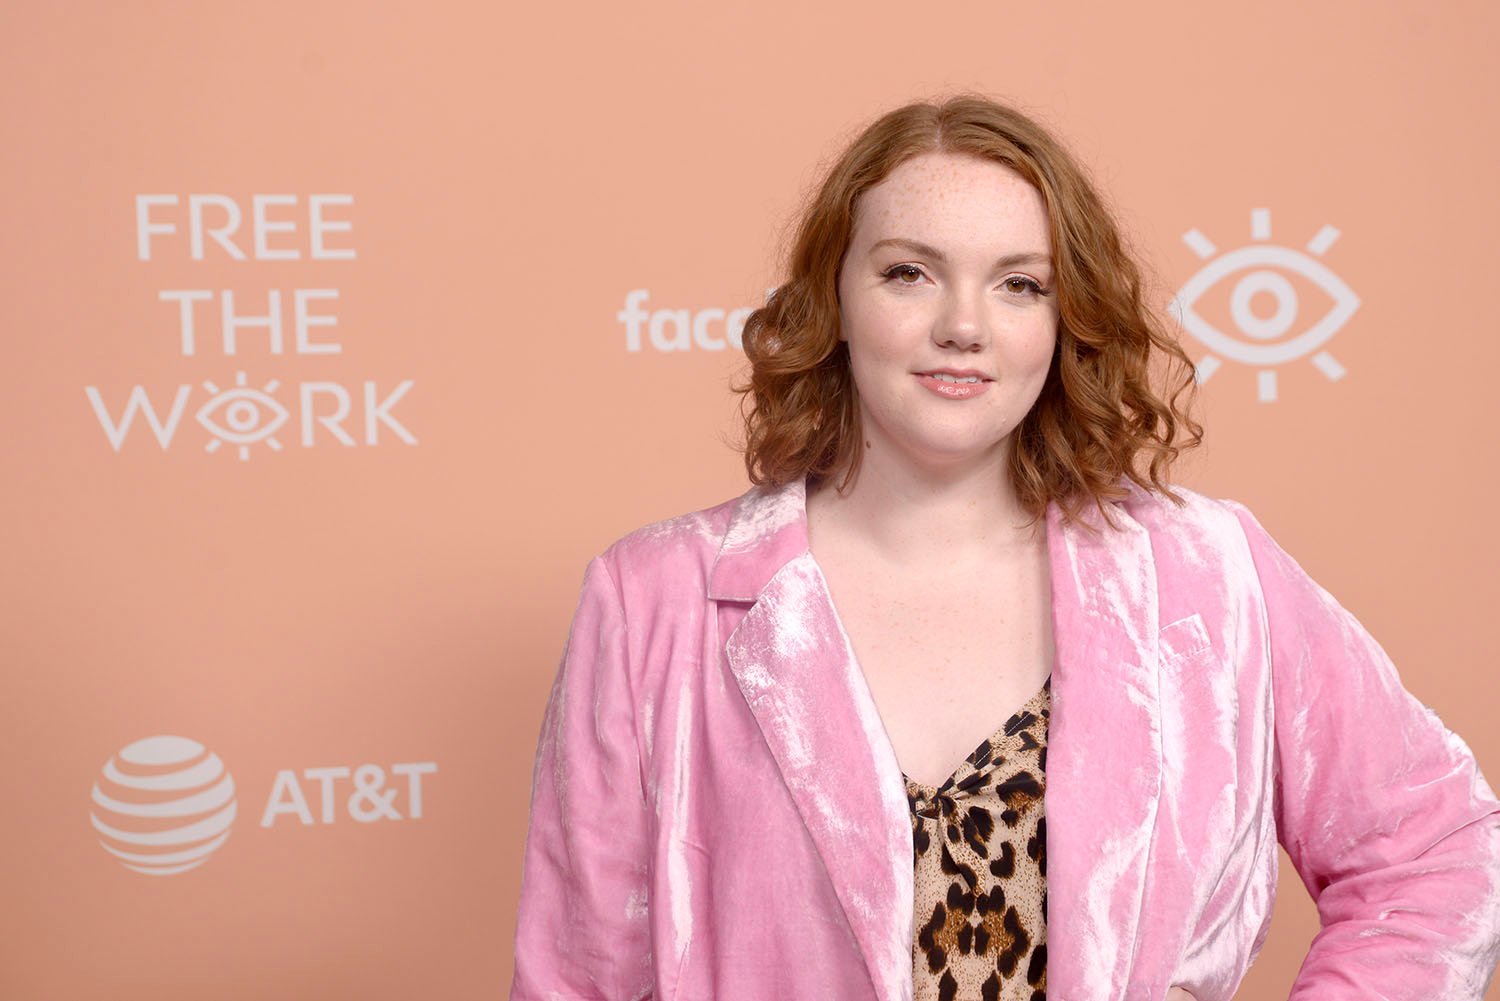 Shannon Purser, who plays Ethel Muggs in the Riverdale 100th episode, attends Free The Work Launch